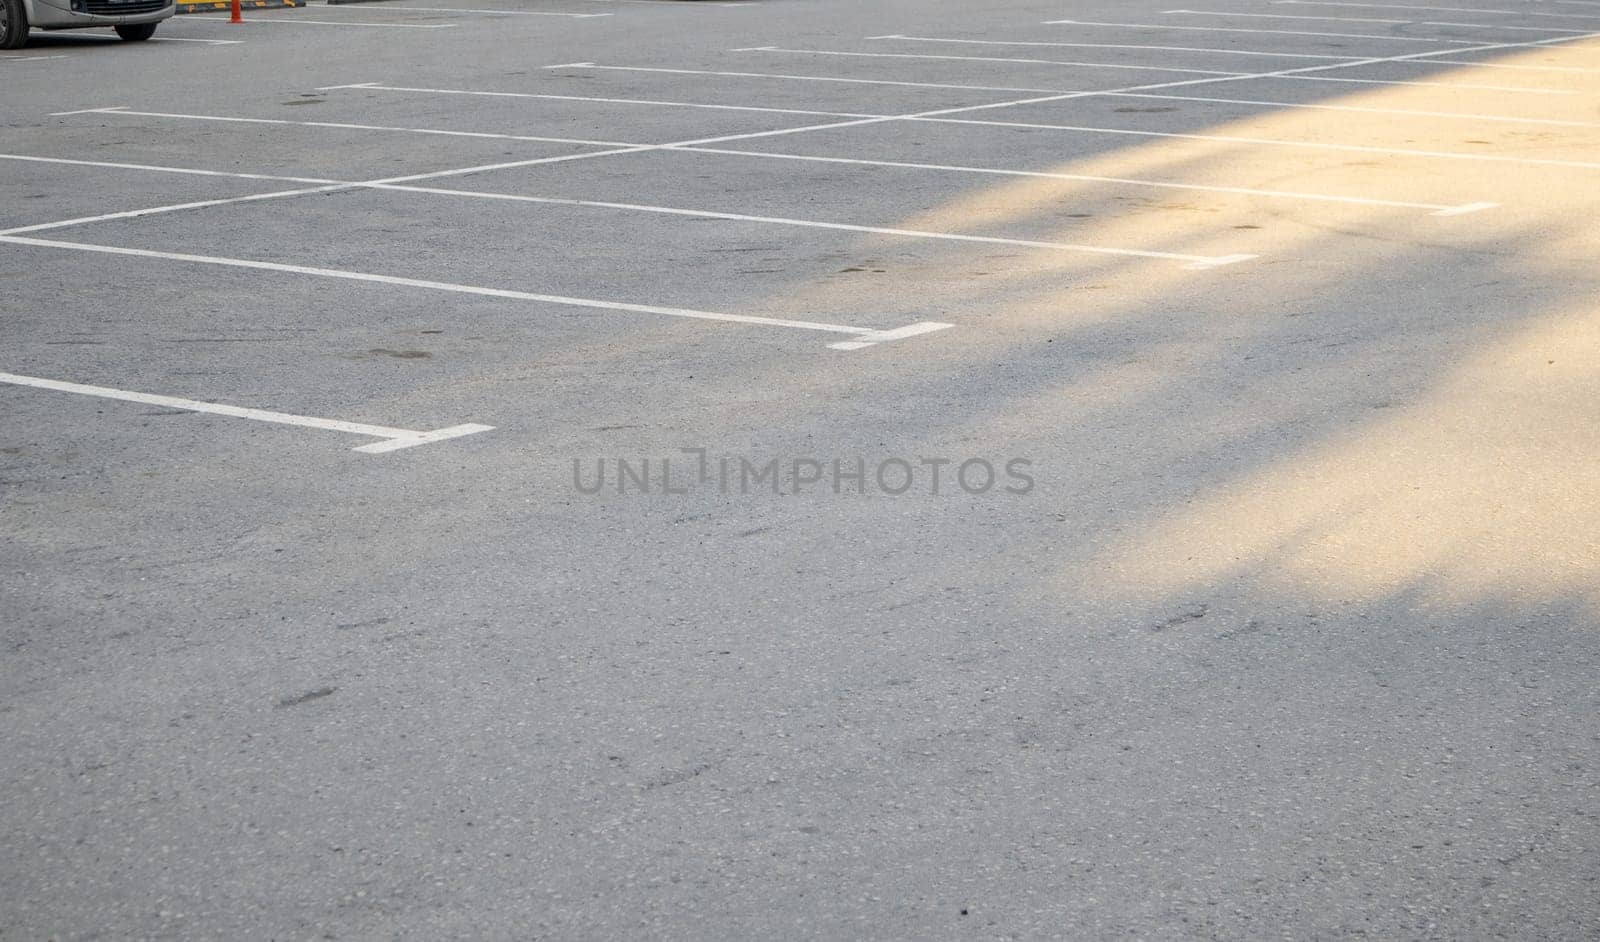 Car parking with white markings on the asphalt, close-up by claire_lucia